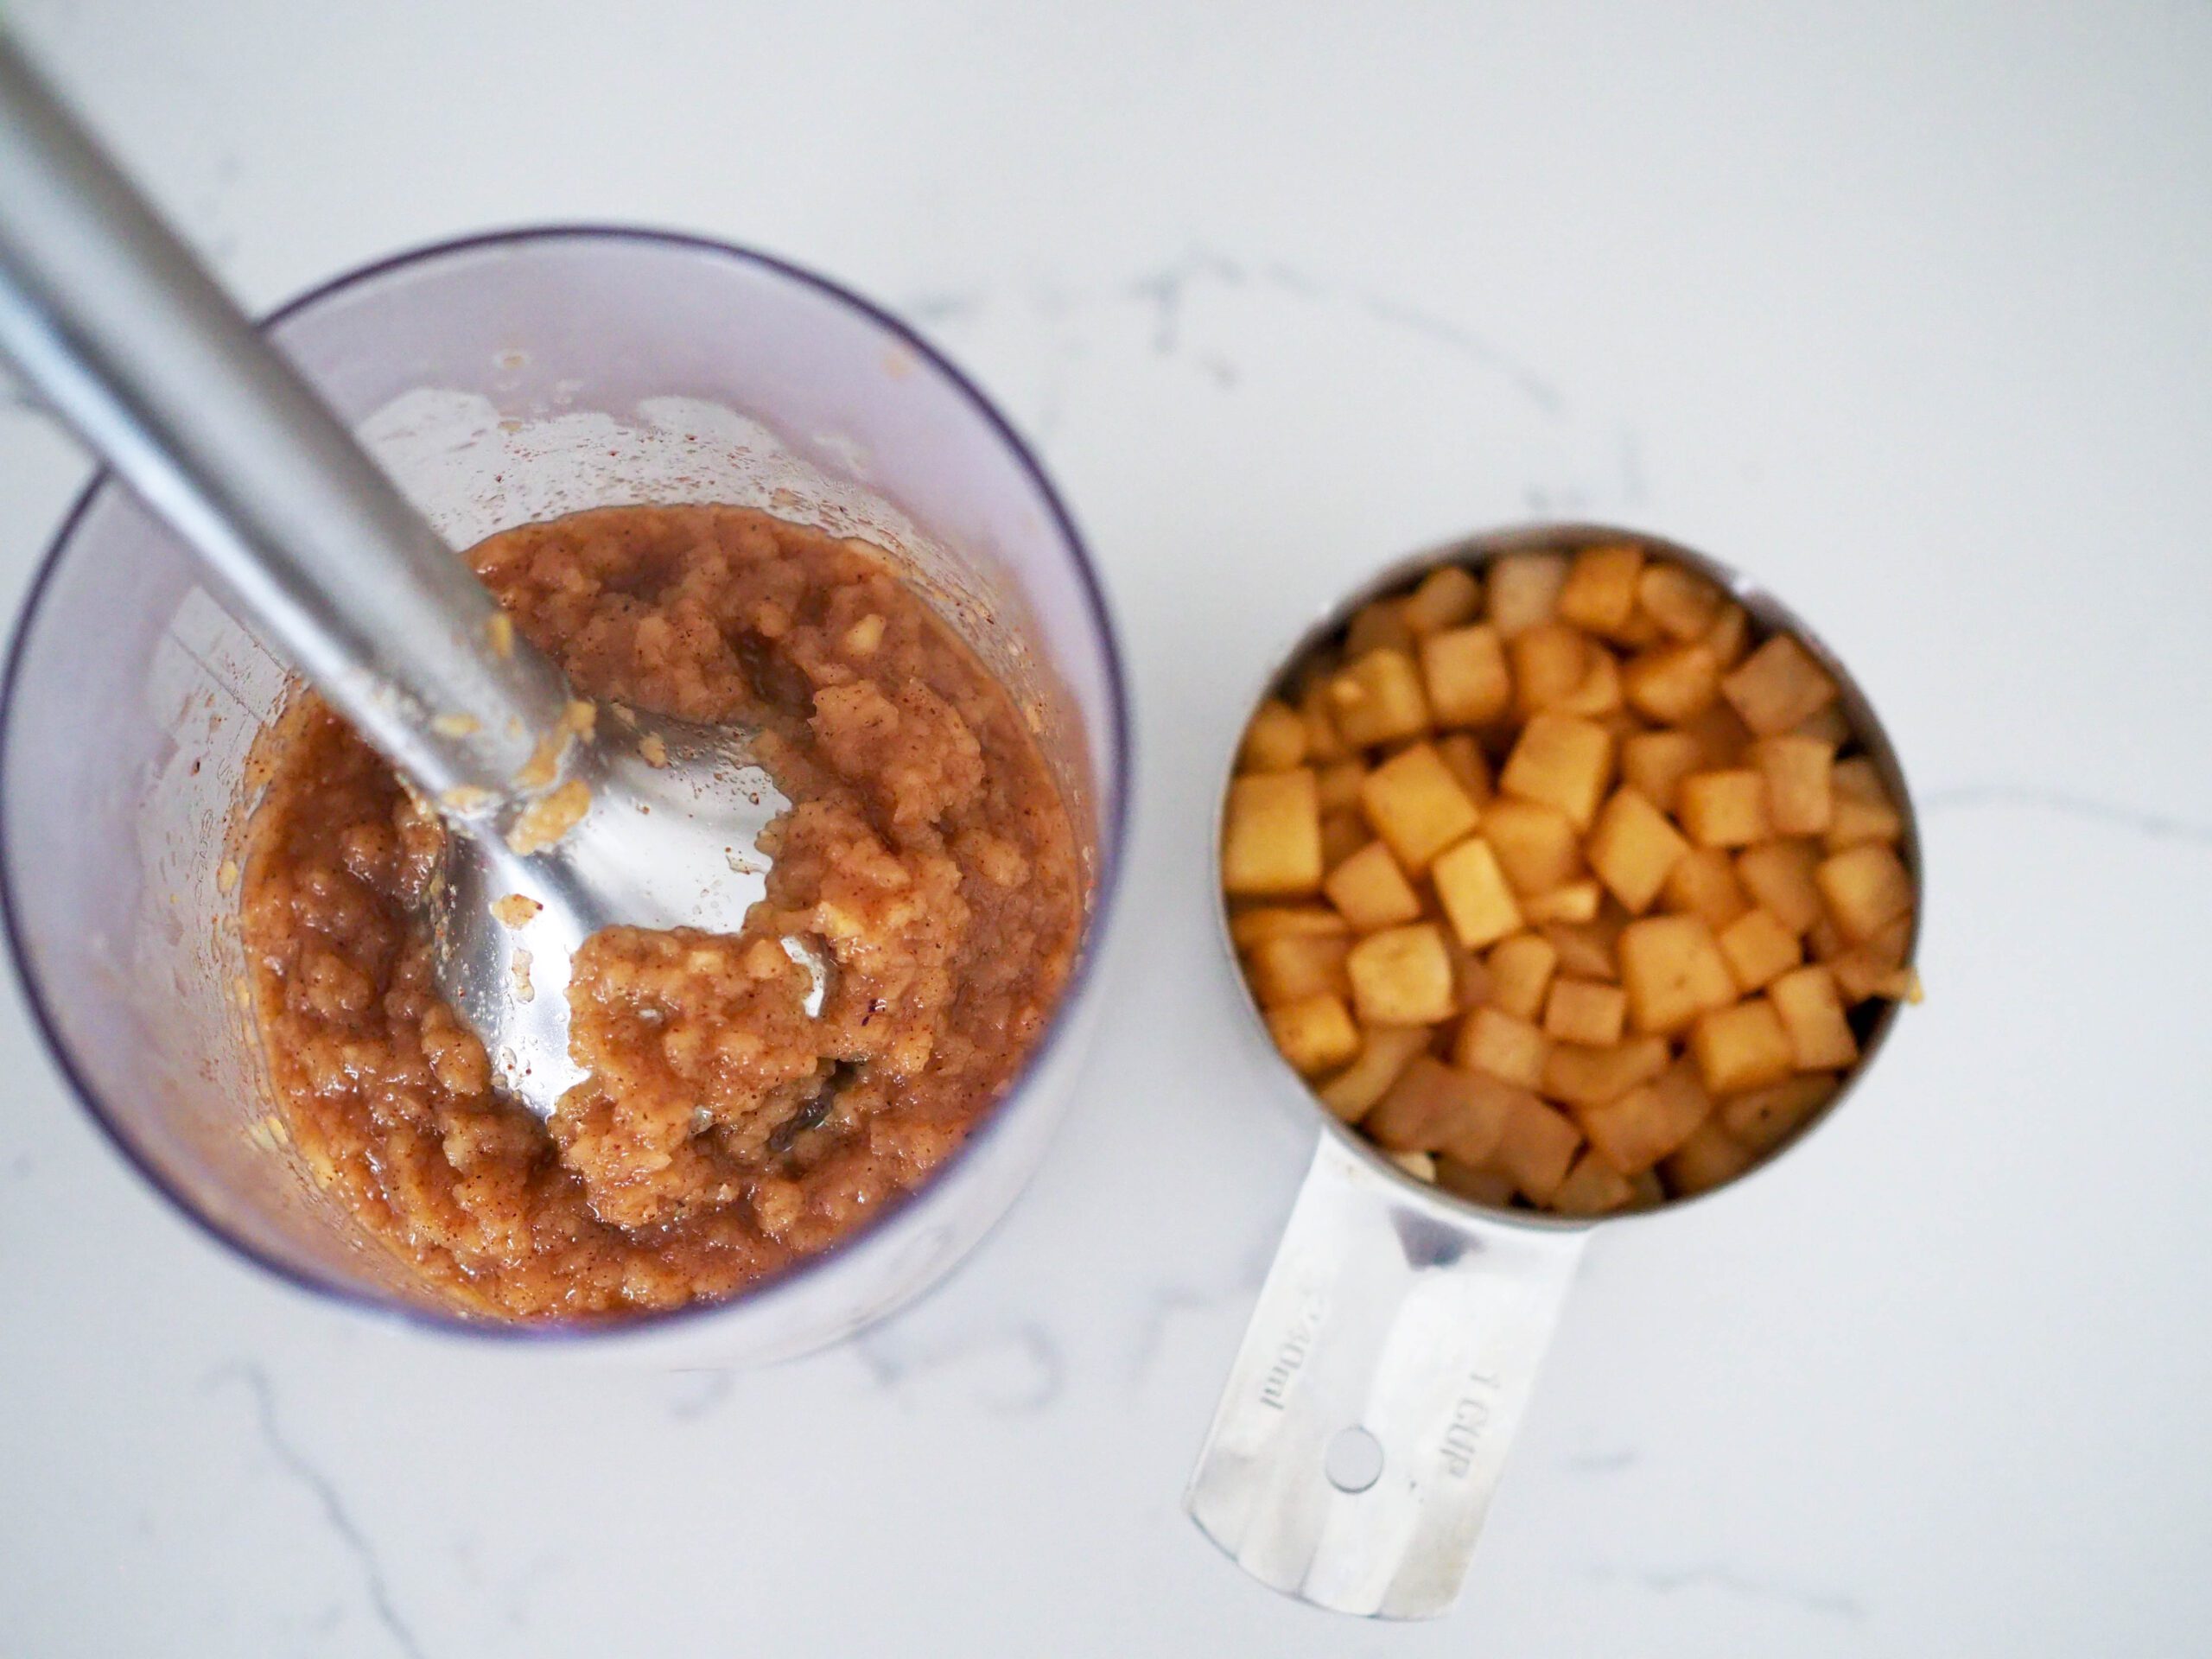 A chunky apple butter on the left, and a cup of diced and spiced apples on the right.